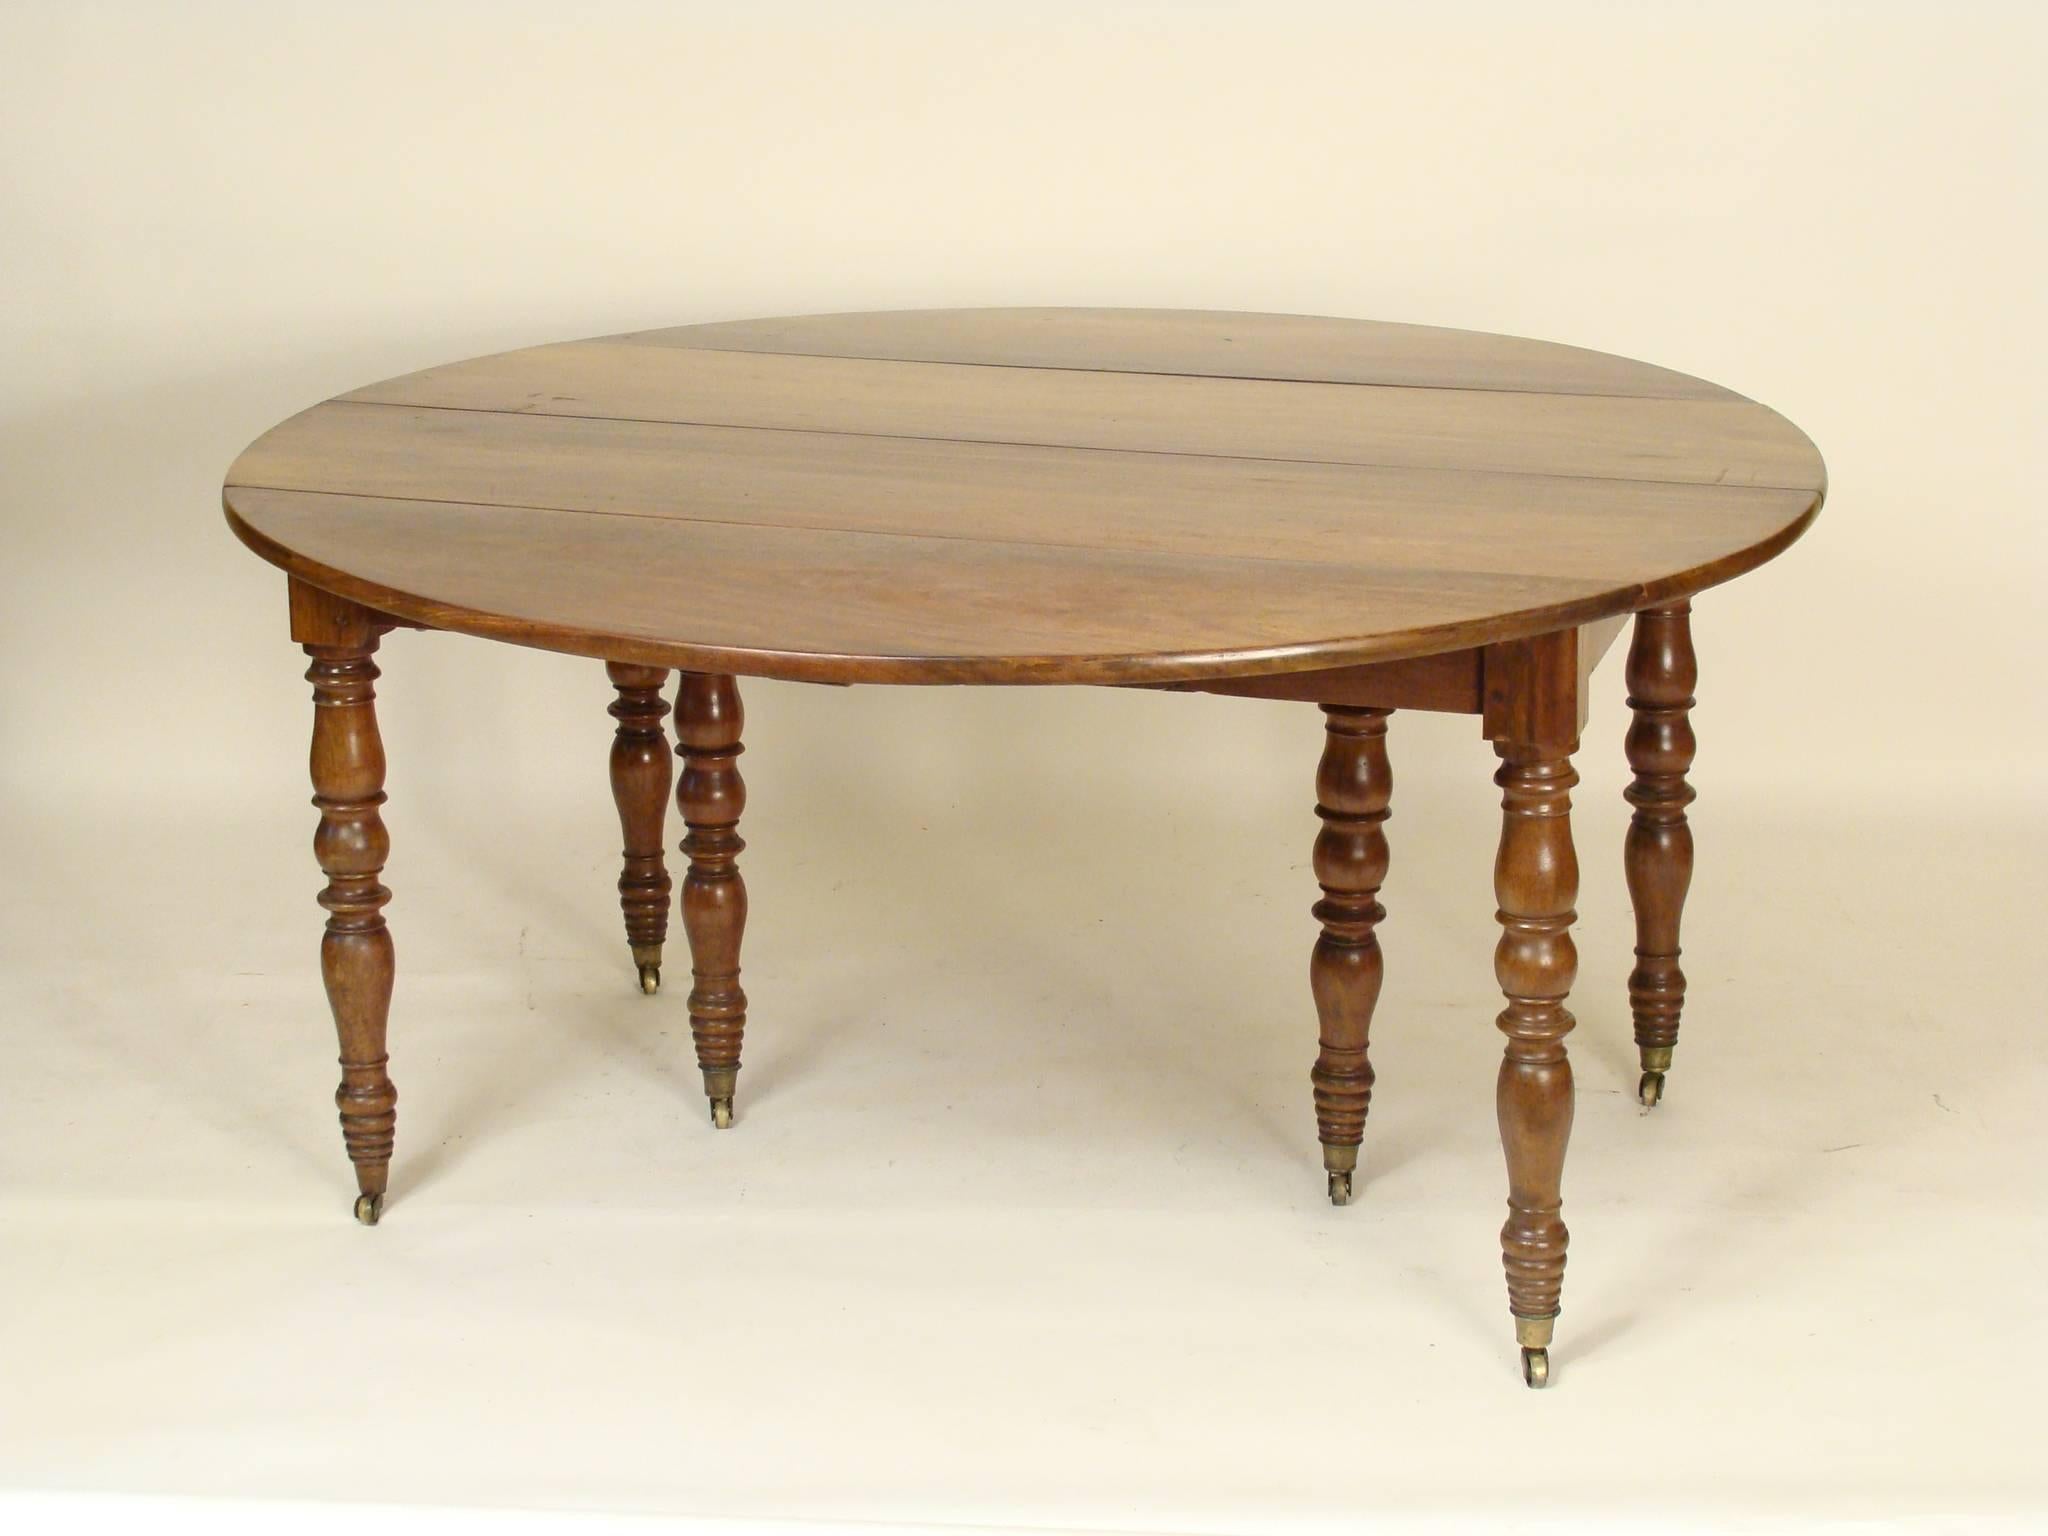 Louis Philippe walnut dropleaf dining room table, circa 1840. Please note this table does not have fills. The dimensions when the drop leafs are down, height 27.5